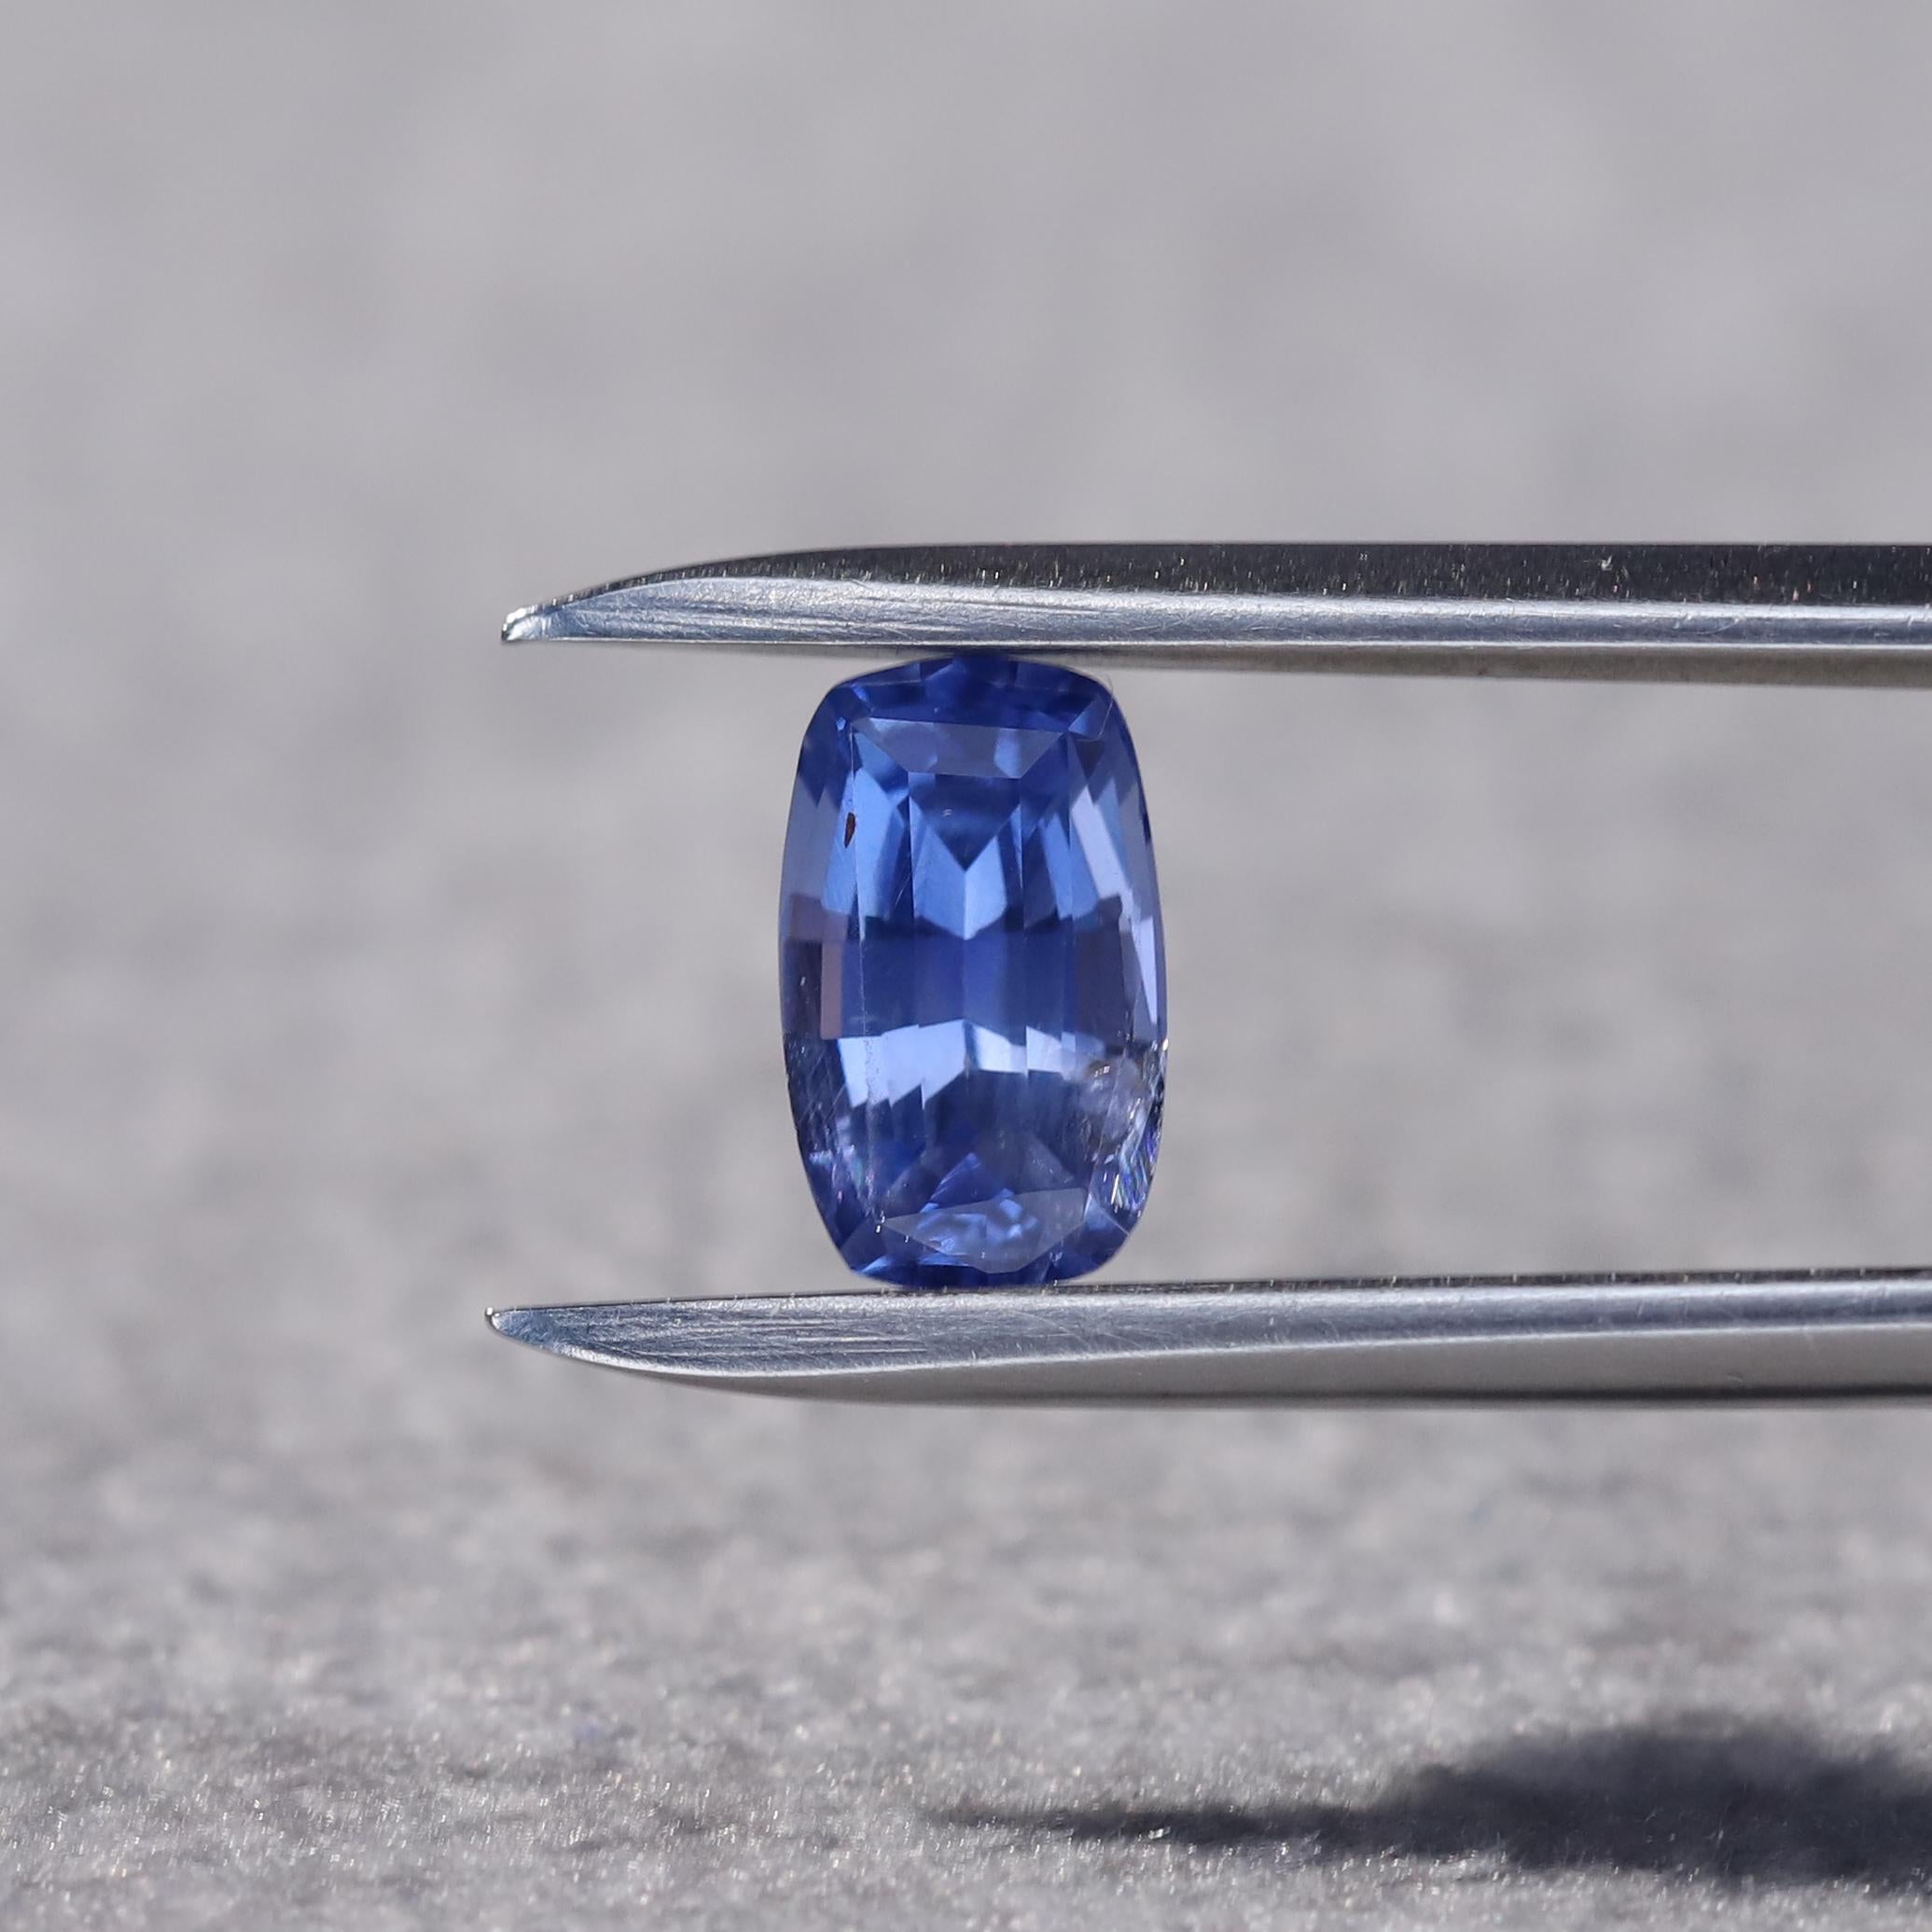 This charming medium-toned ceylonese blue sapphire exudes the tranquility of the pristine waters of a serene lake.

Natural unheated medium blue sapphire. Sourced from ceylon. 1.19 ct. 

This magnificent blue sapphire by KNS Gems is available for